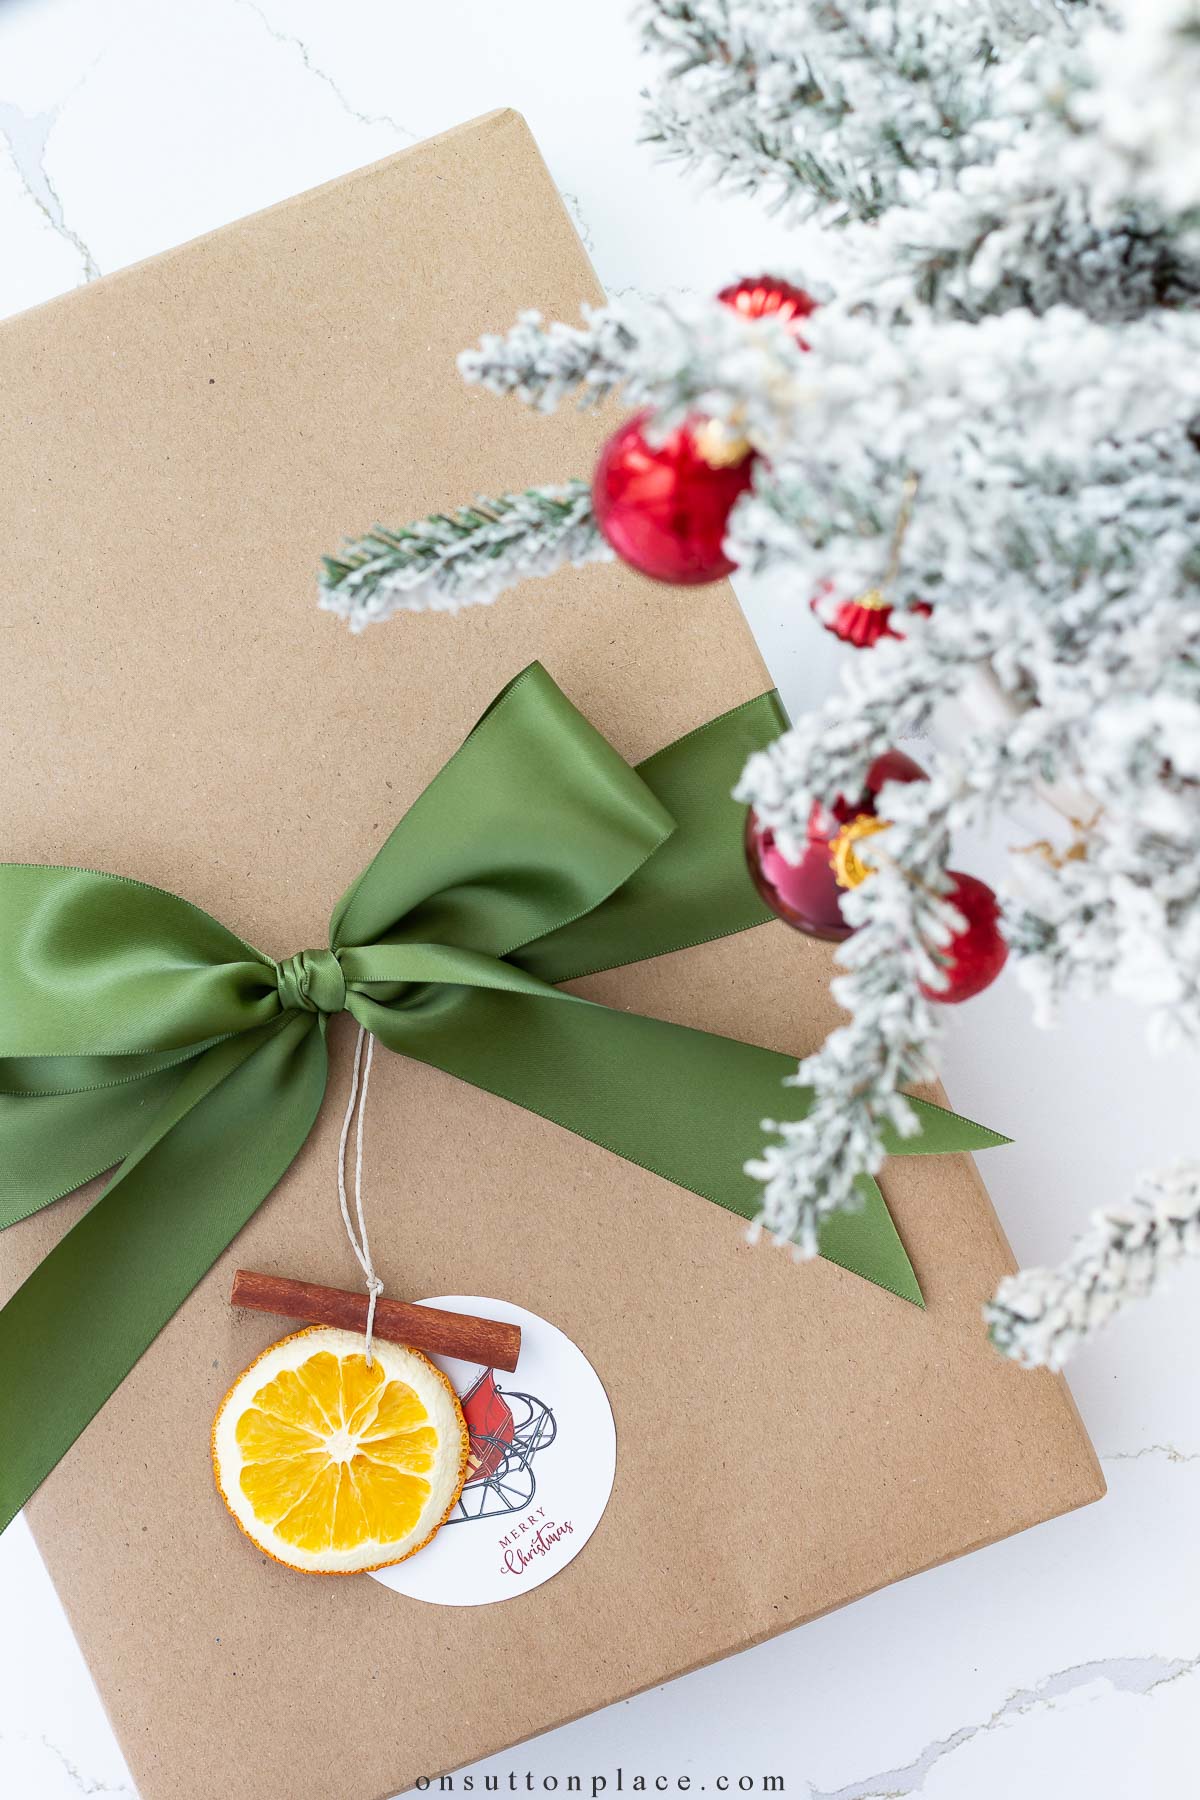 Creative Gift Wrapping Inspiration from Top Designers